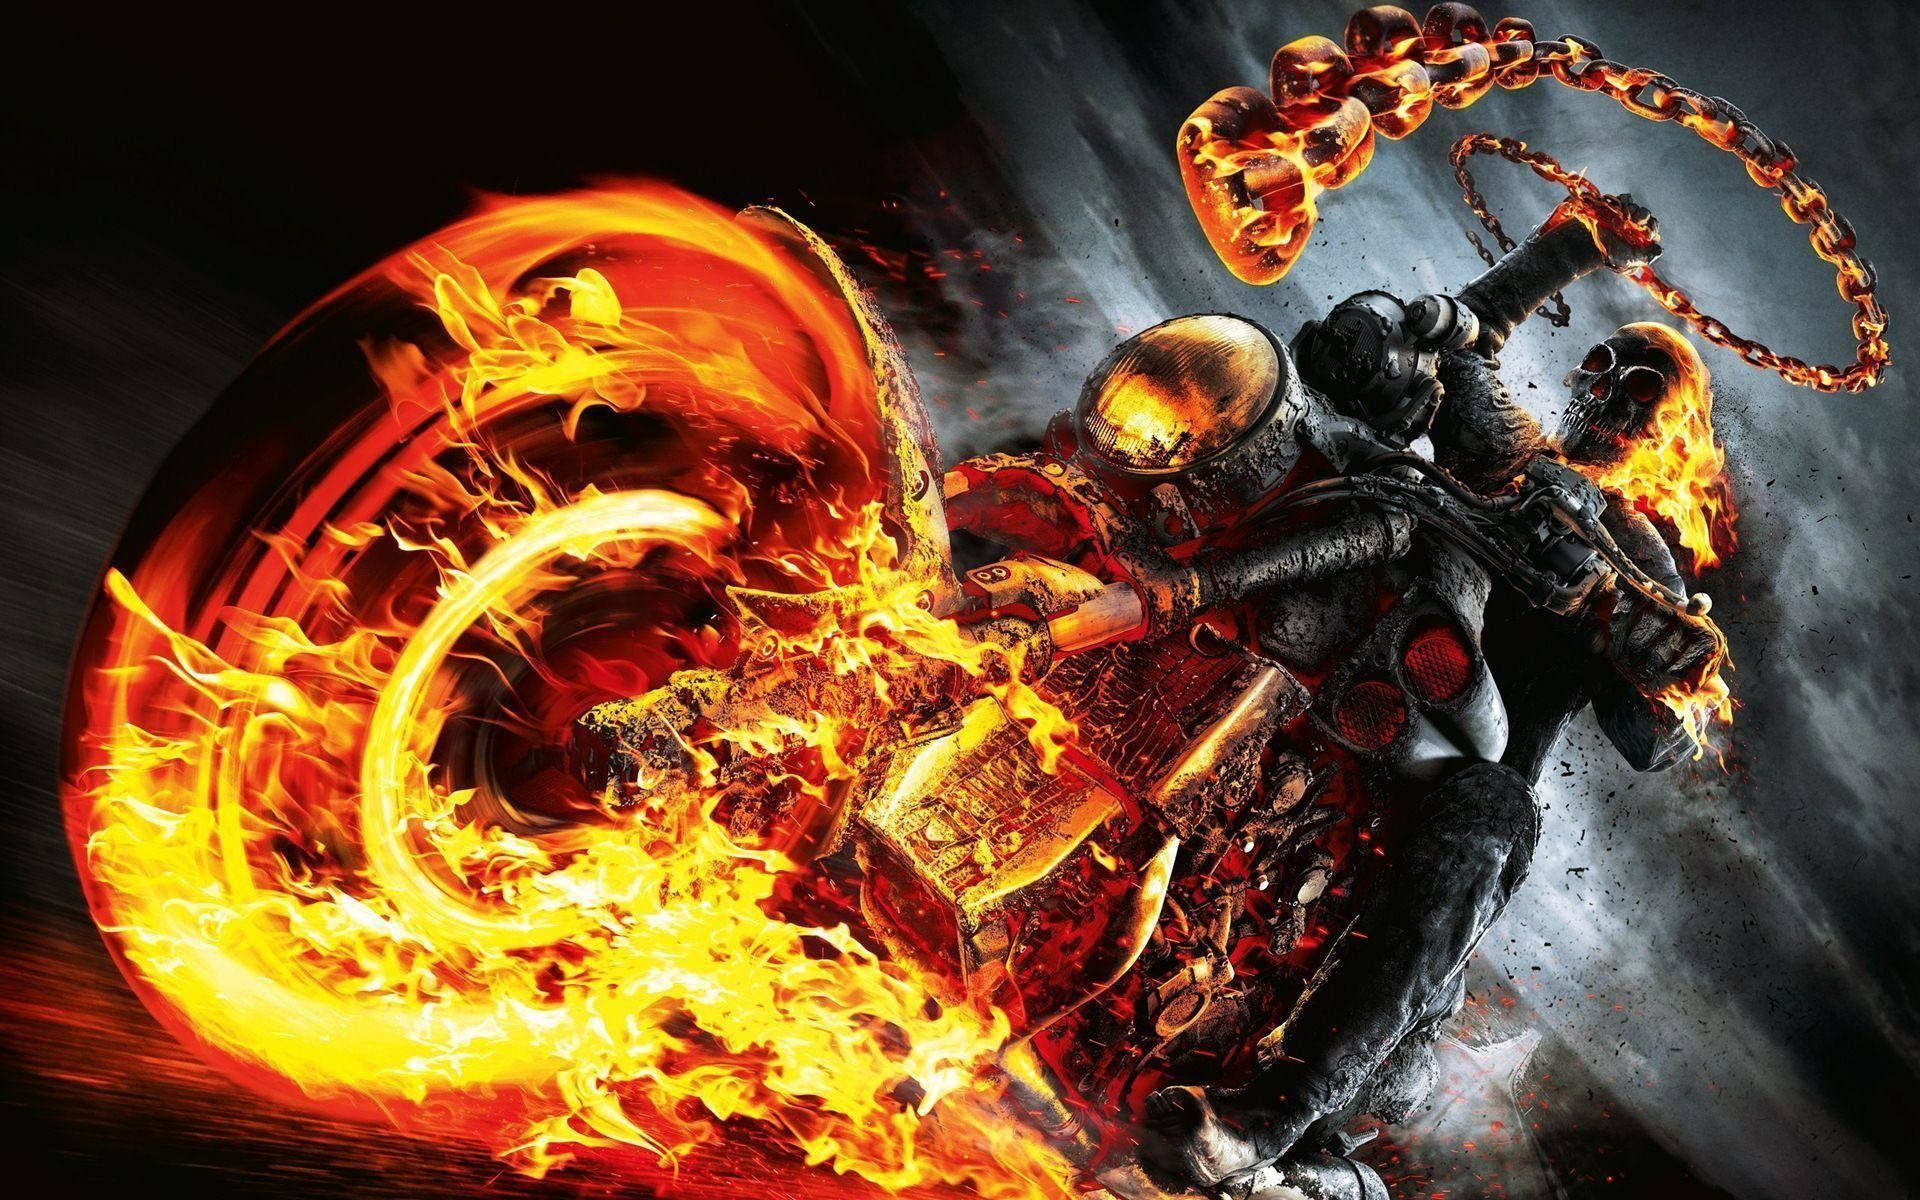 Cool 3d Ghost Rider With Burning Chain